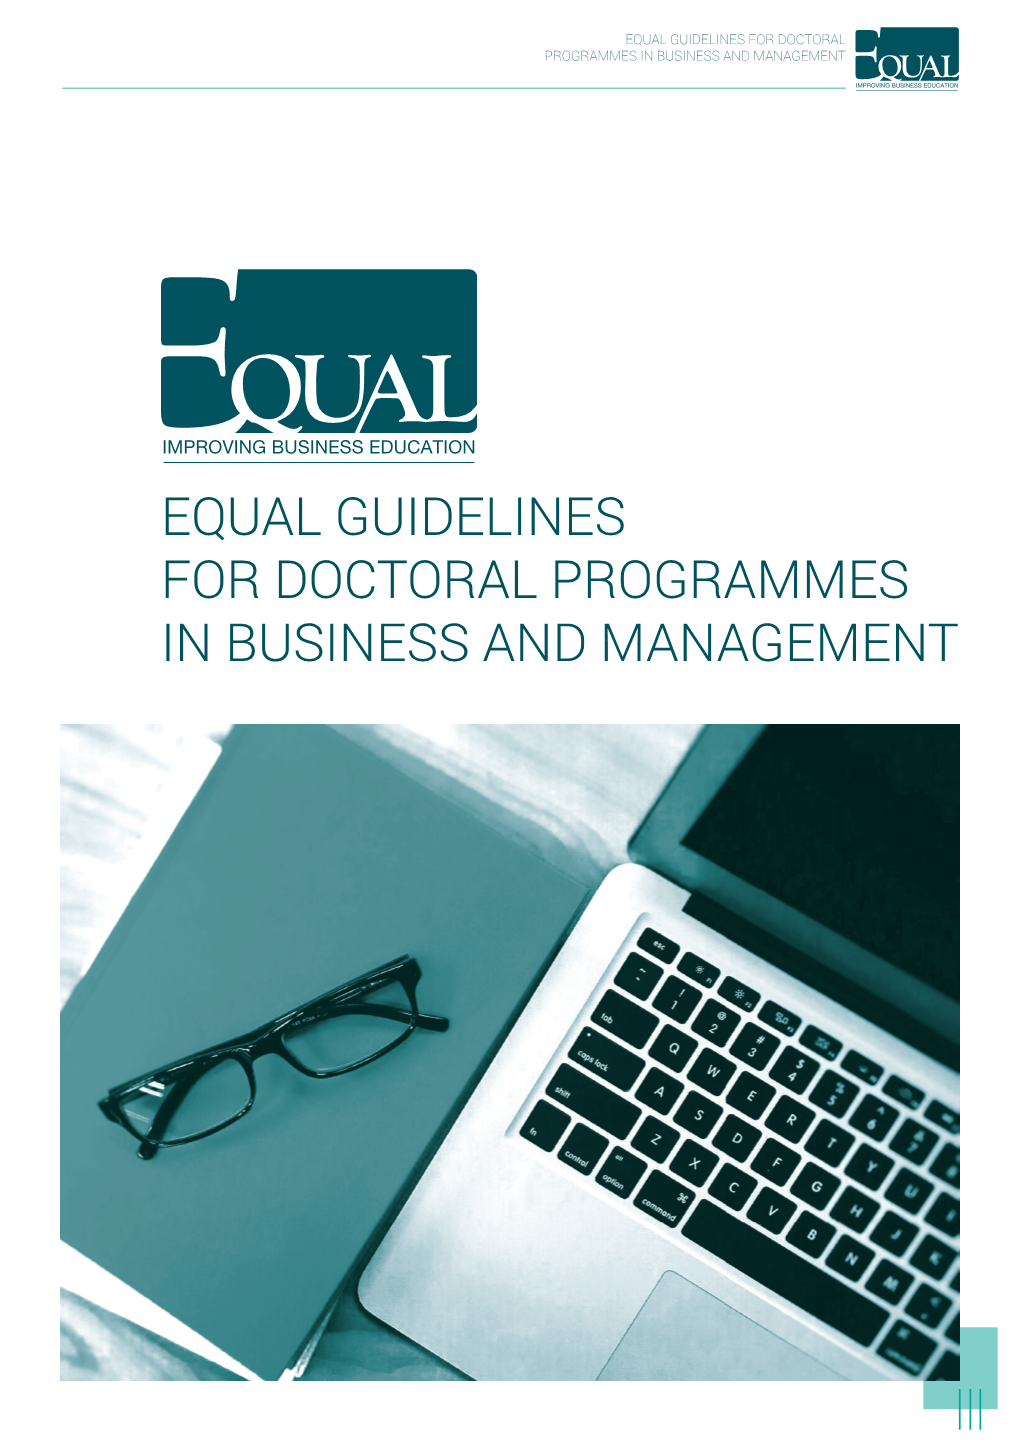 Equal Guidelines for Doctoral Programmes in Business and Management